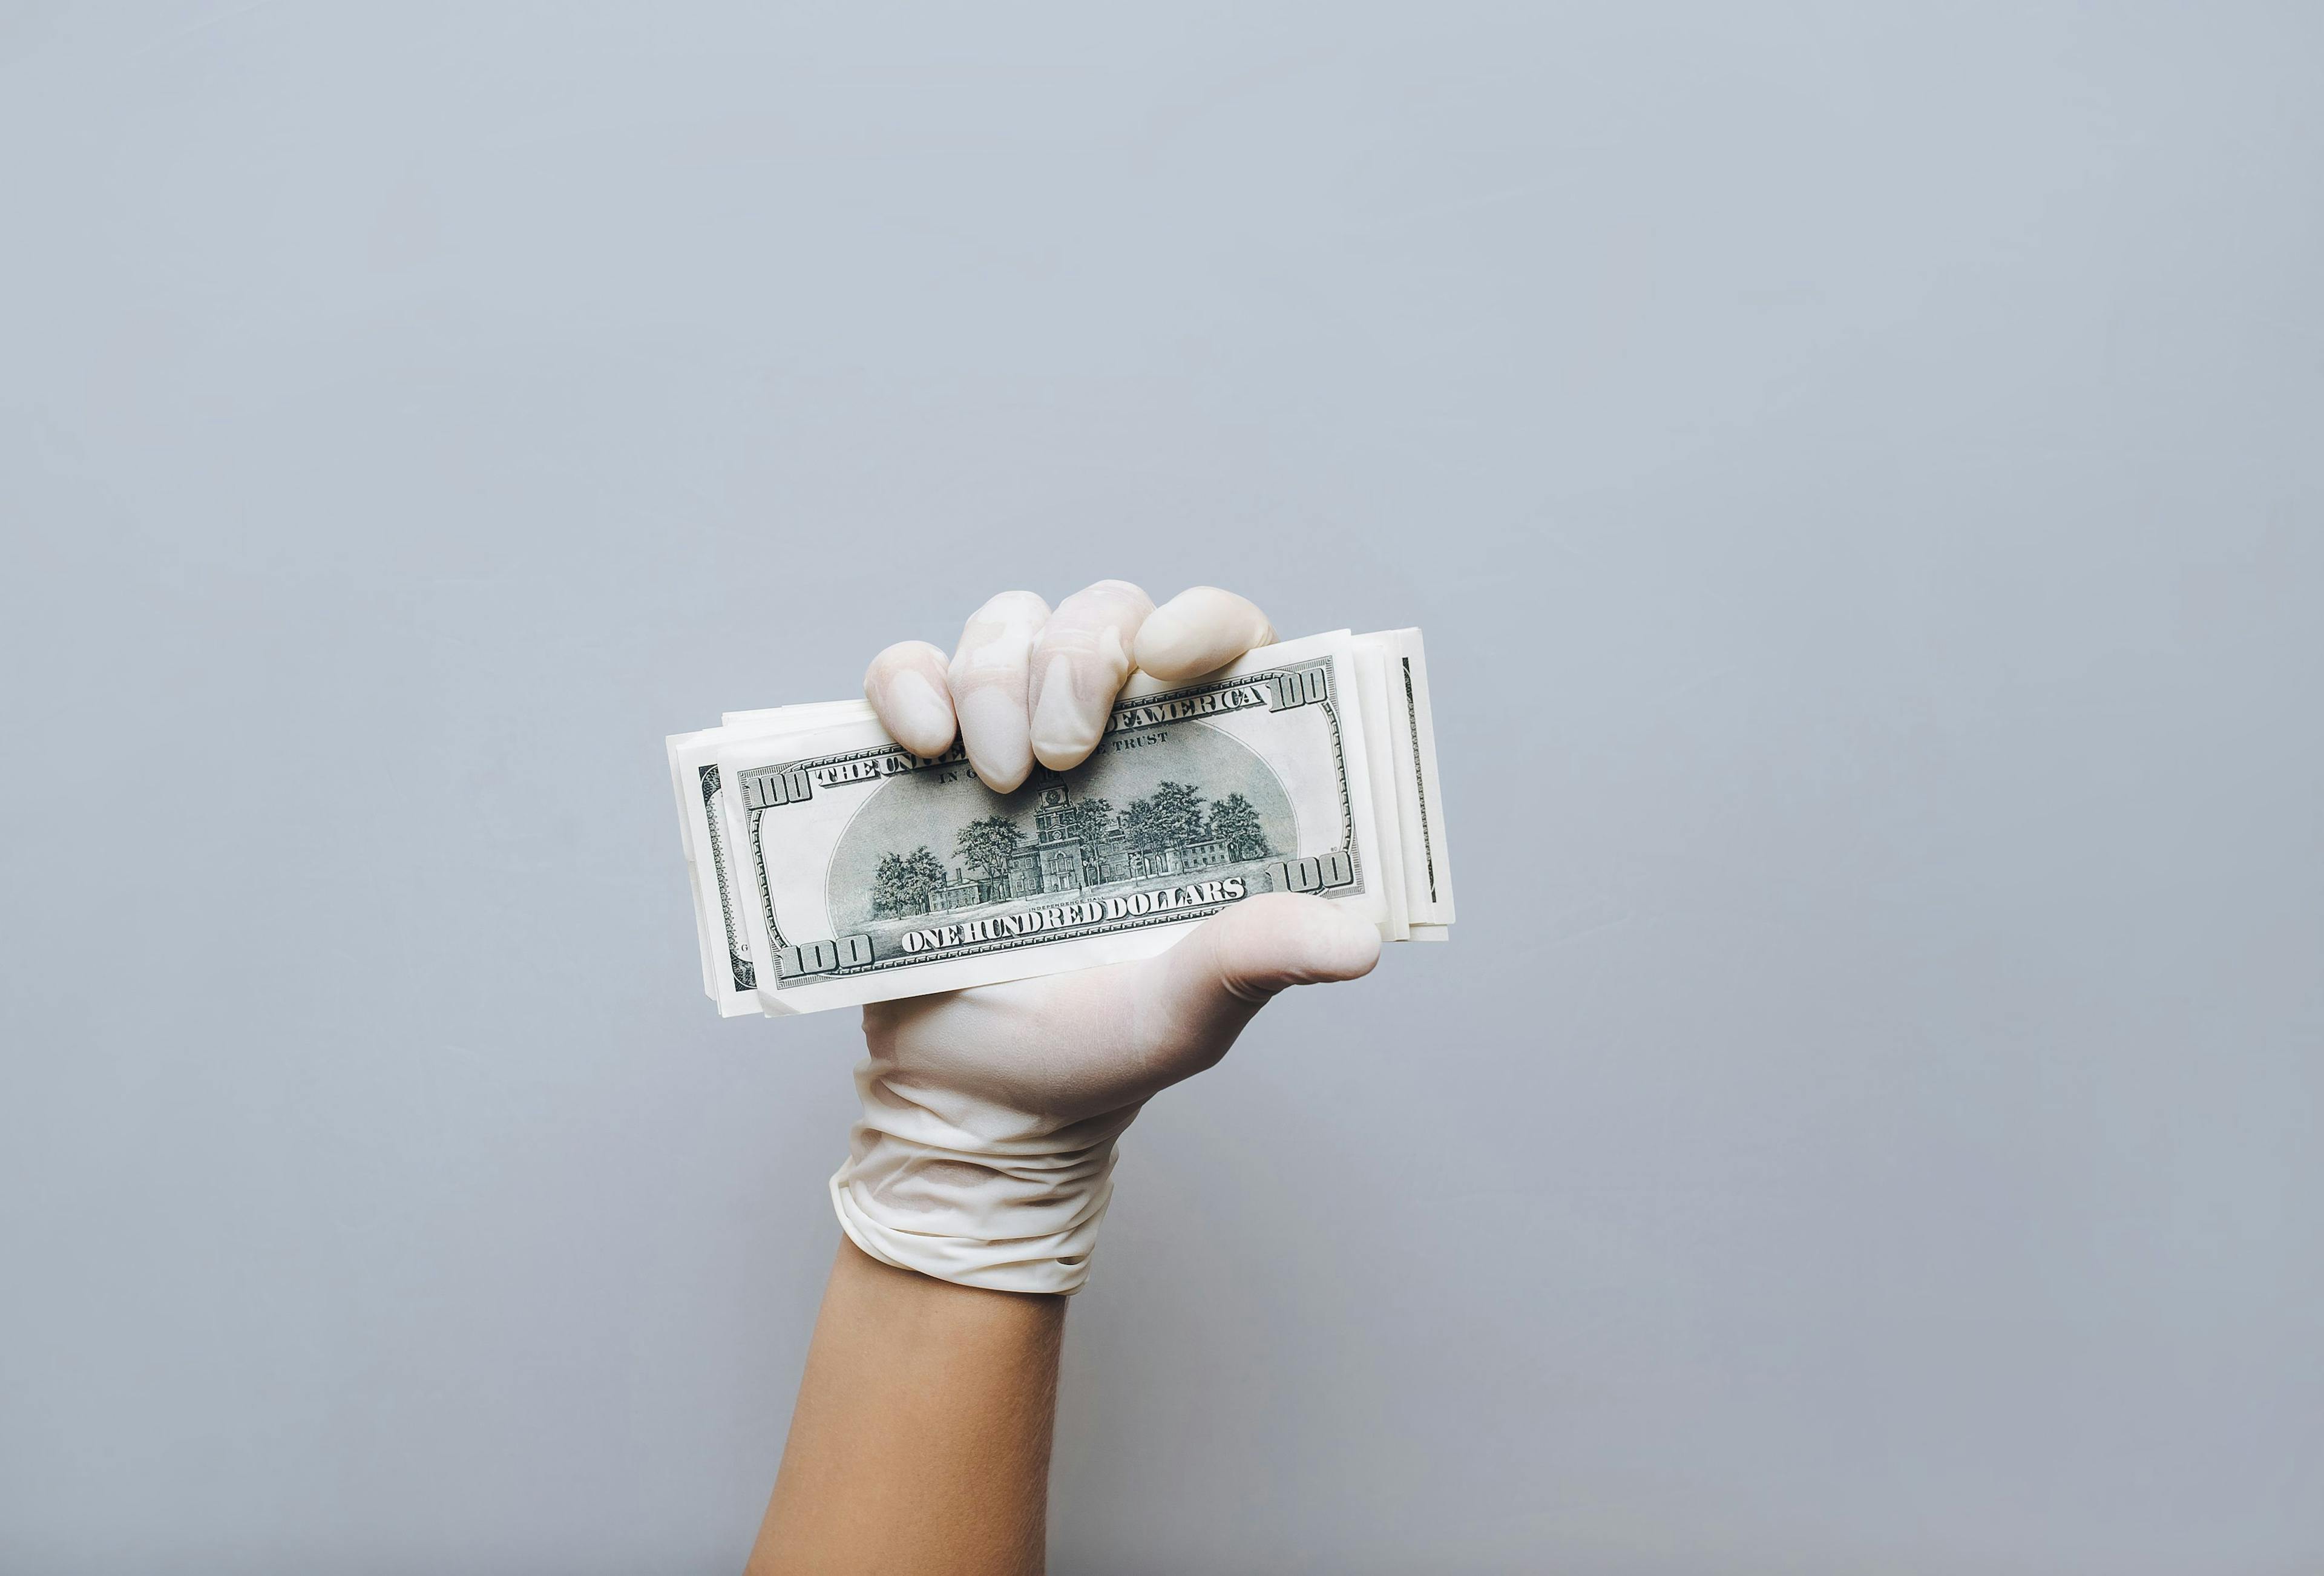 Tips for capturing specialty practice revenue